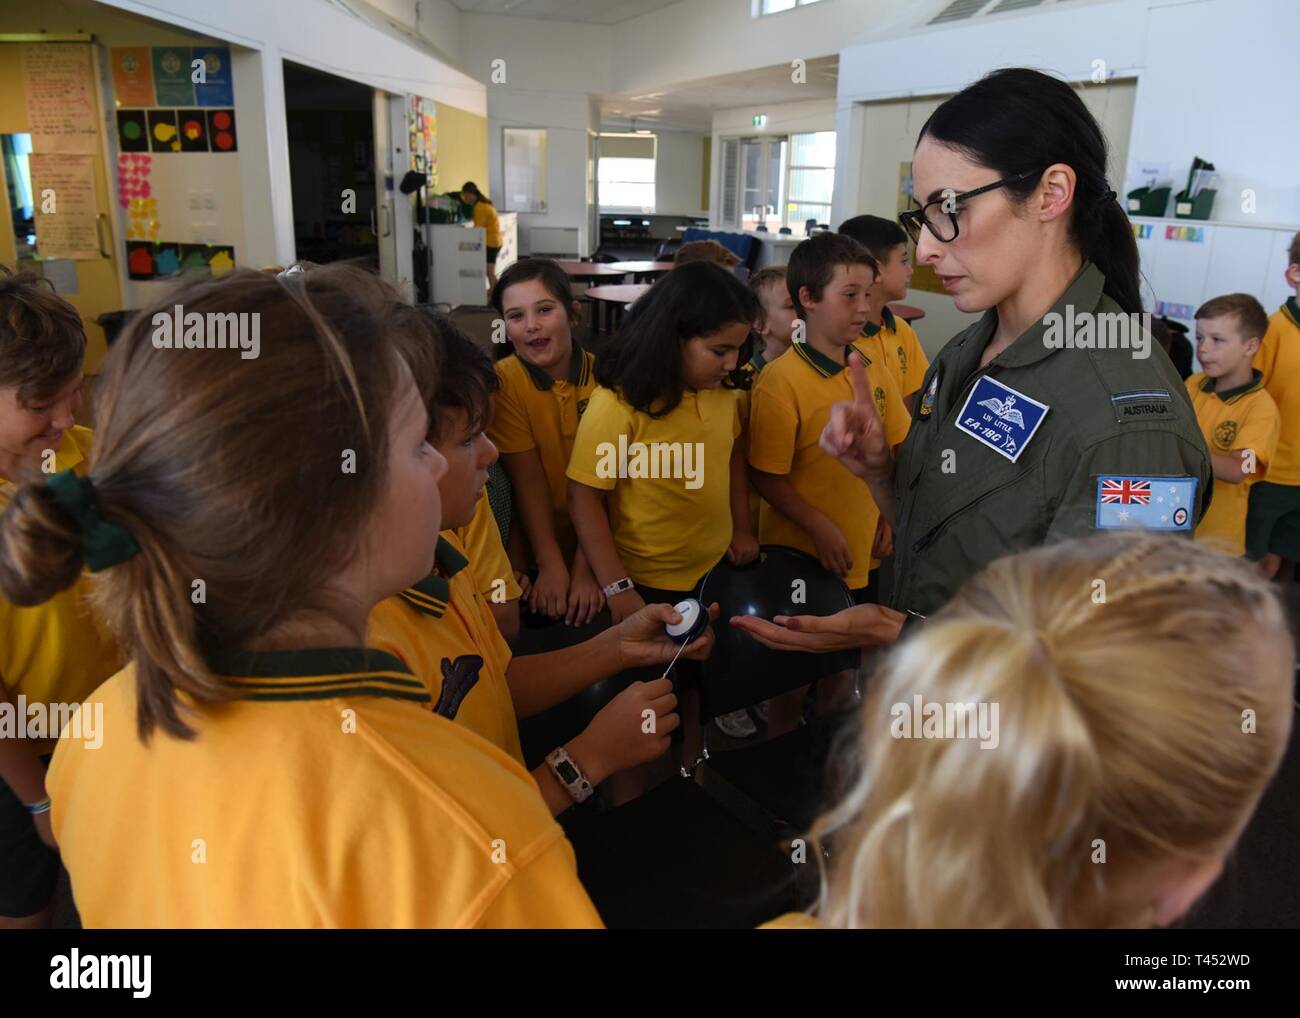 Royal Australian Air Force Flying Officer Olivia Little, electronic warfare officer with the No. 6 Squadron, Amberly, Queensland, Australia, hands out souvenirs to Lara Primary School students at Geelong, Victoria, Australia, Feb. 26, 2019. During the visit, Little talked to students about why she joined the Air Force and her job duties. Stock Photo